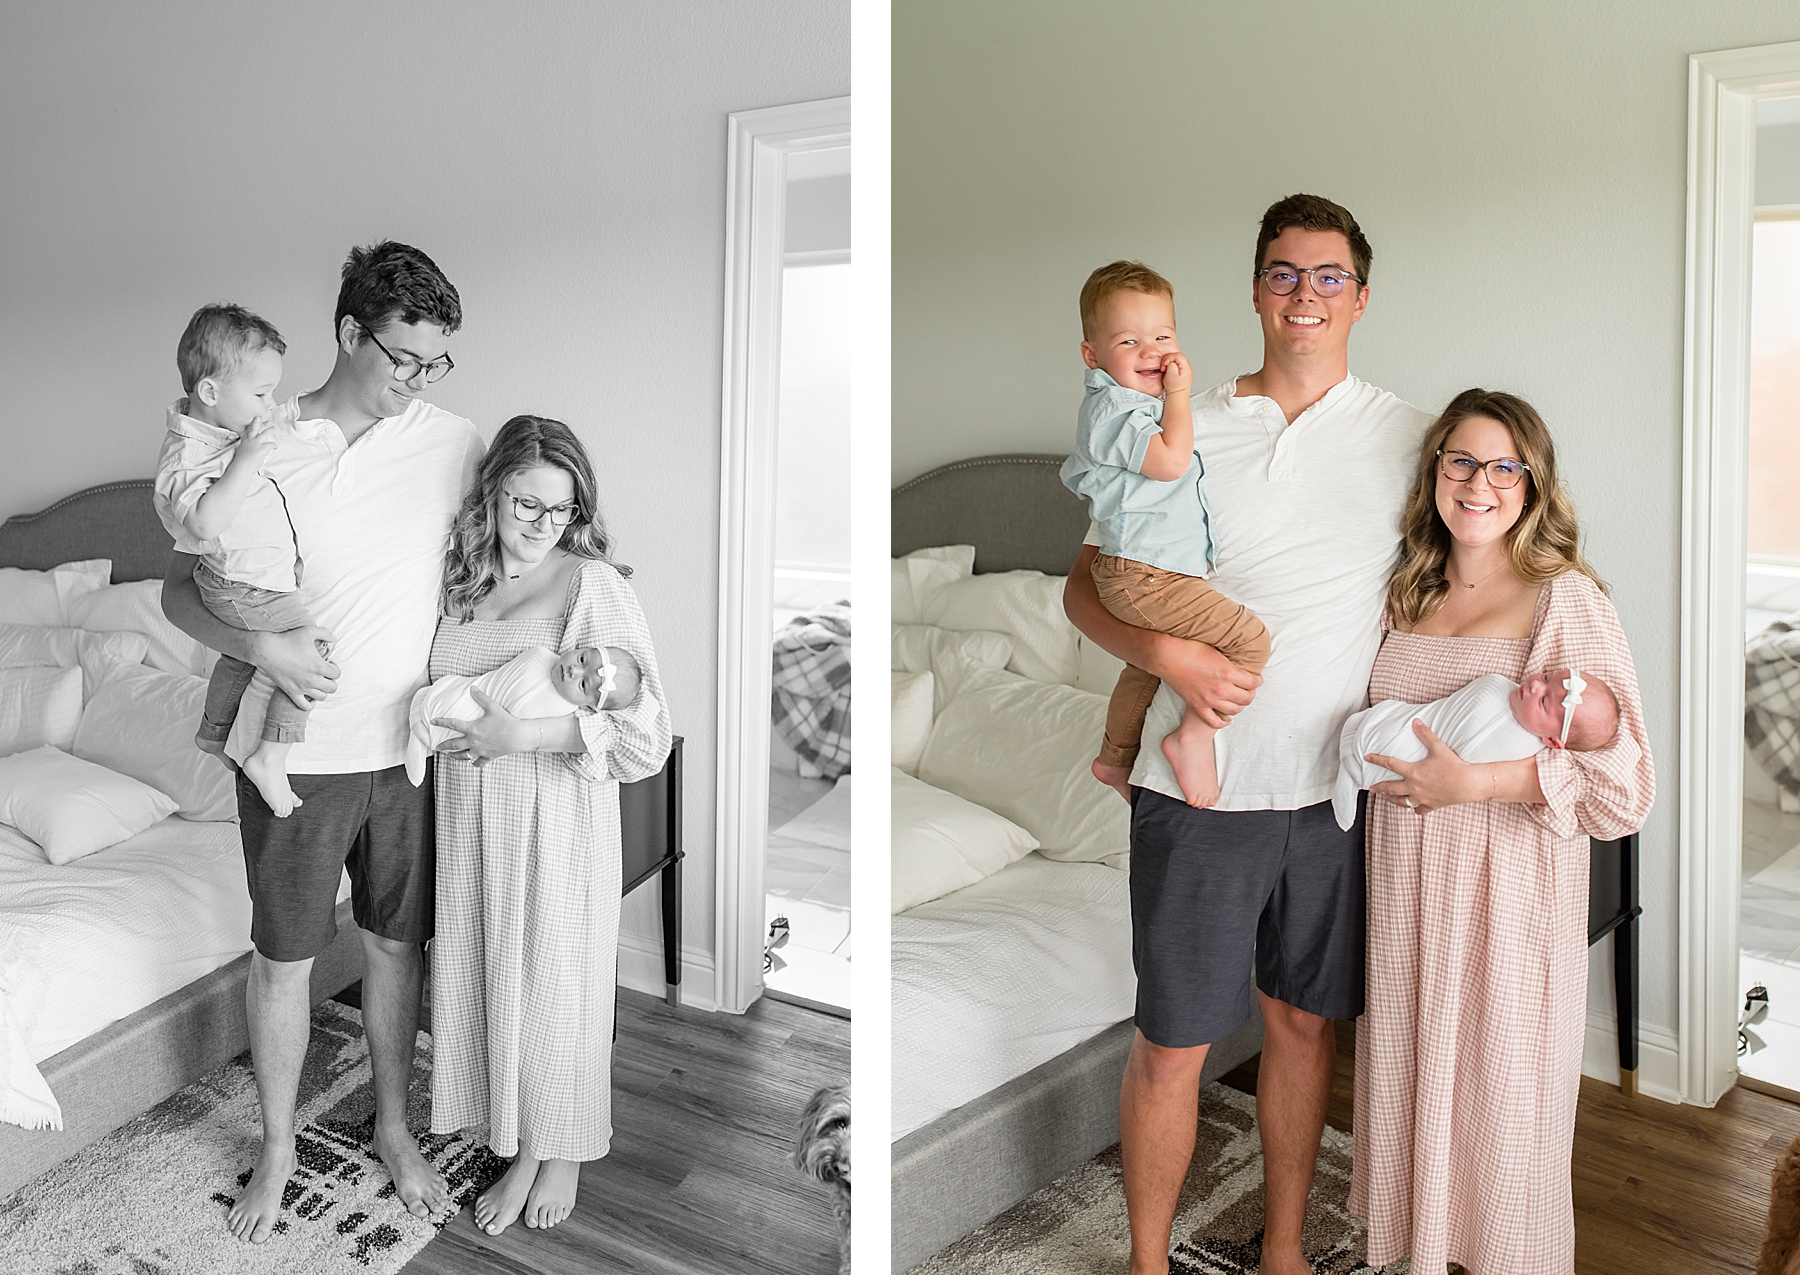 In-Home Newborn Session with family in Dallas | Lindsey Dutton Photography | newborn photos, family photos at home, neutral family outfits | via lindseyduttonphotography.com